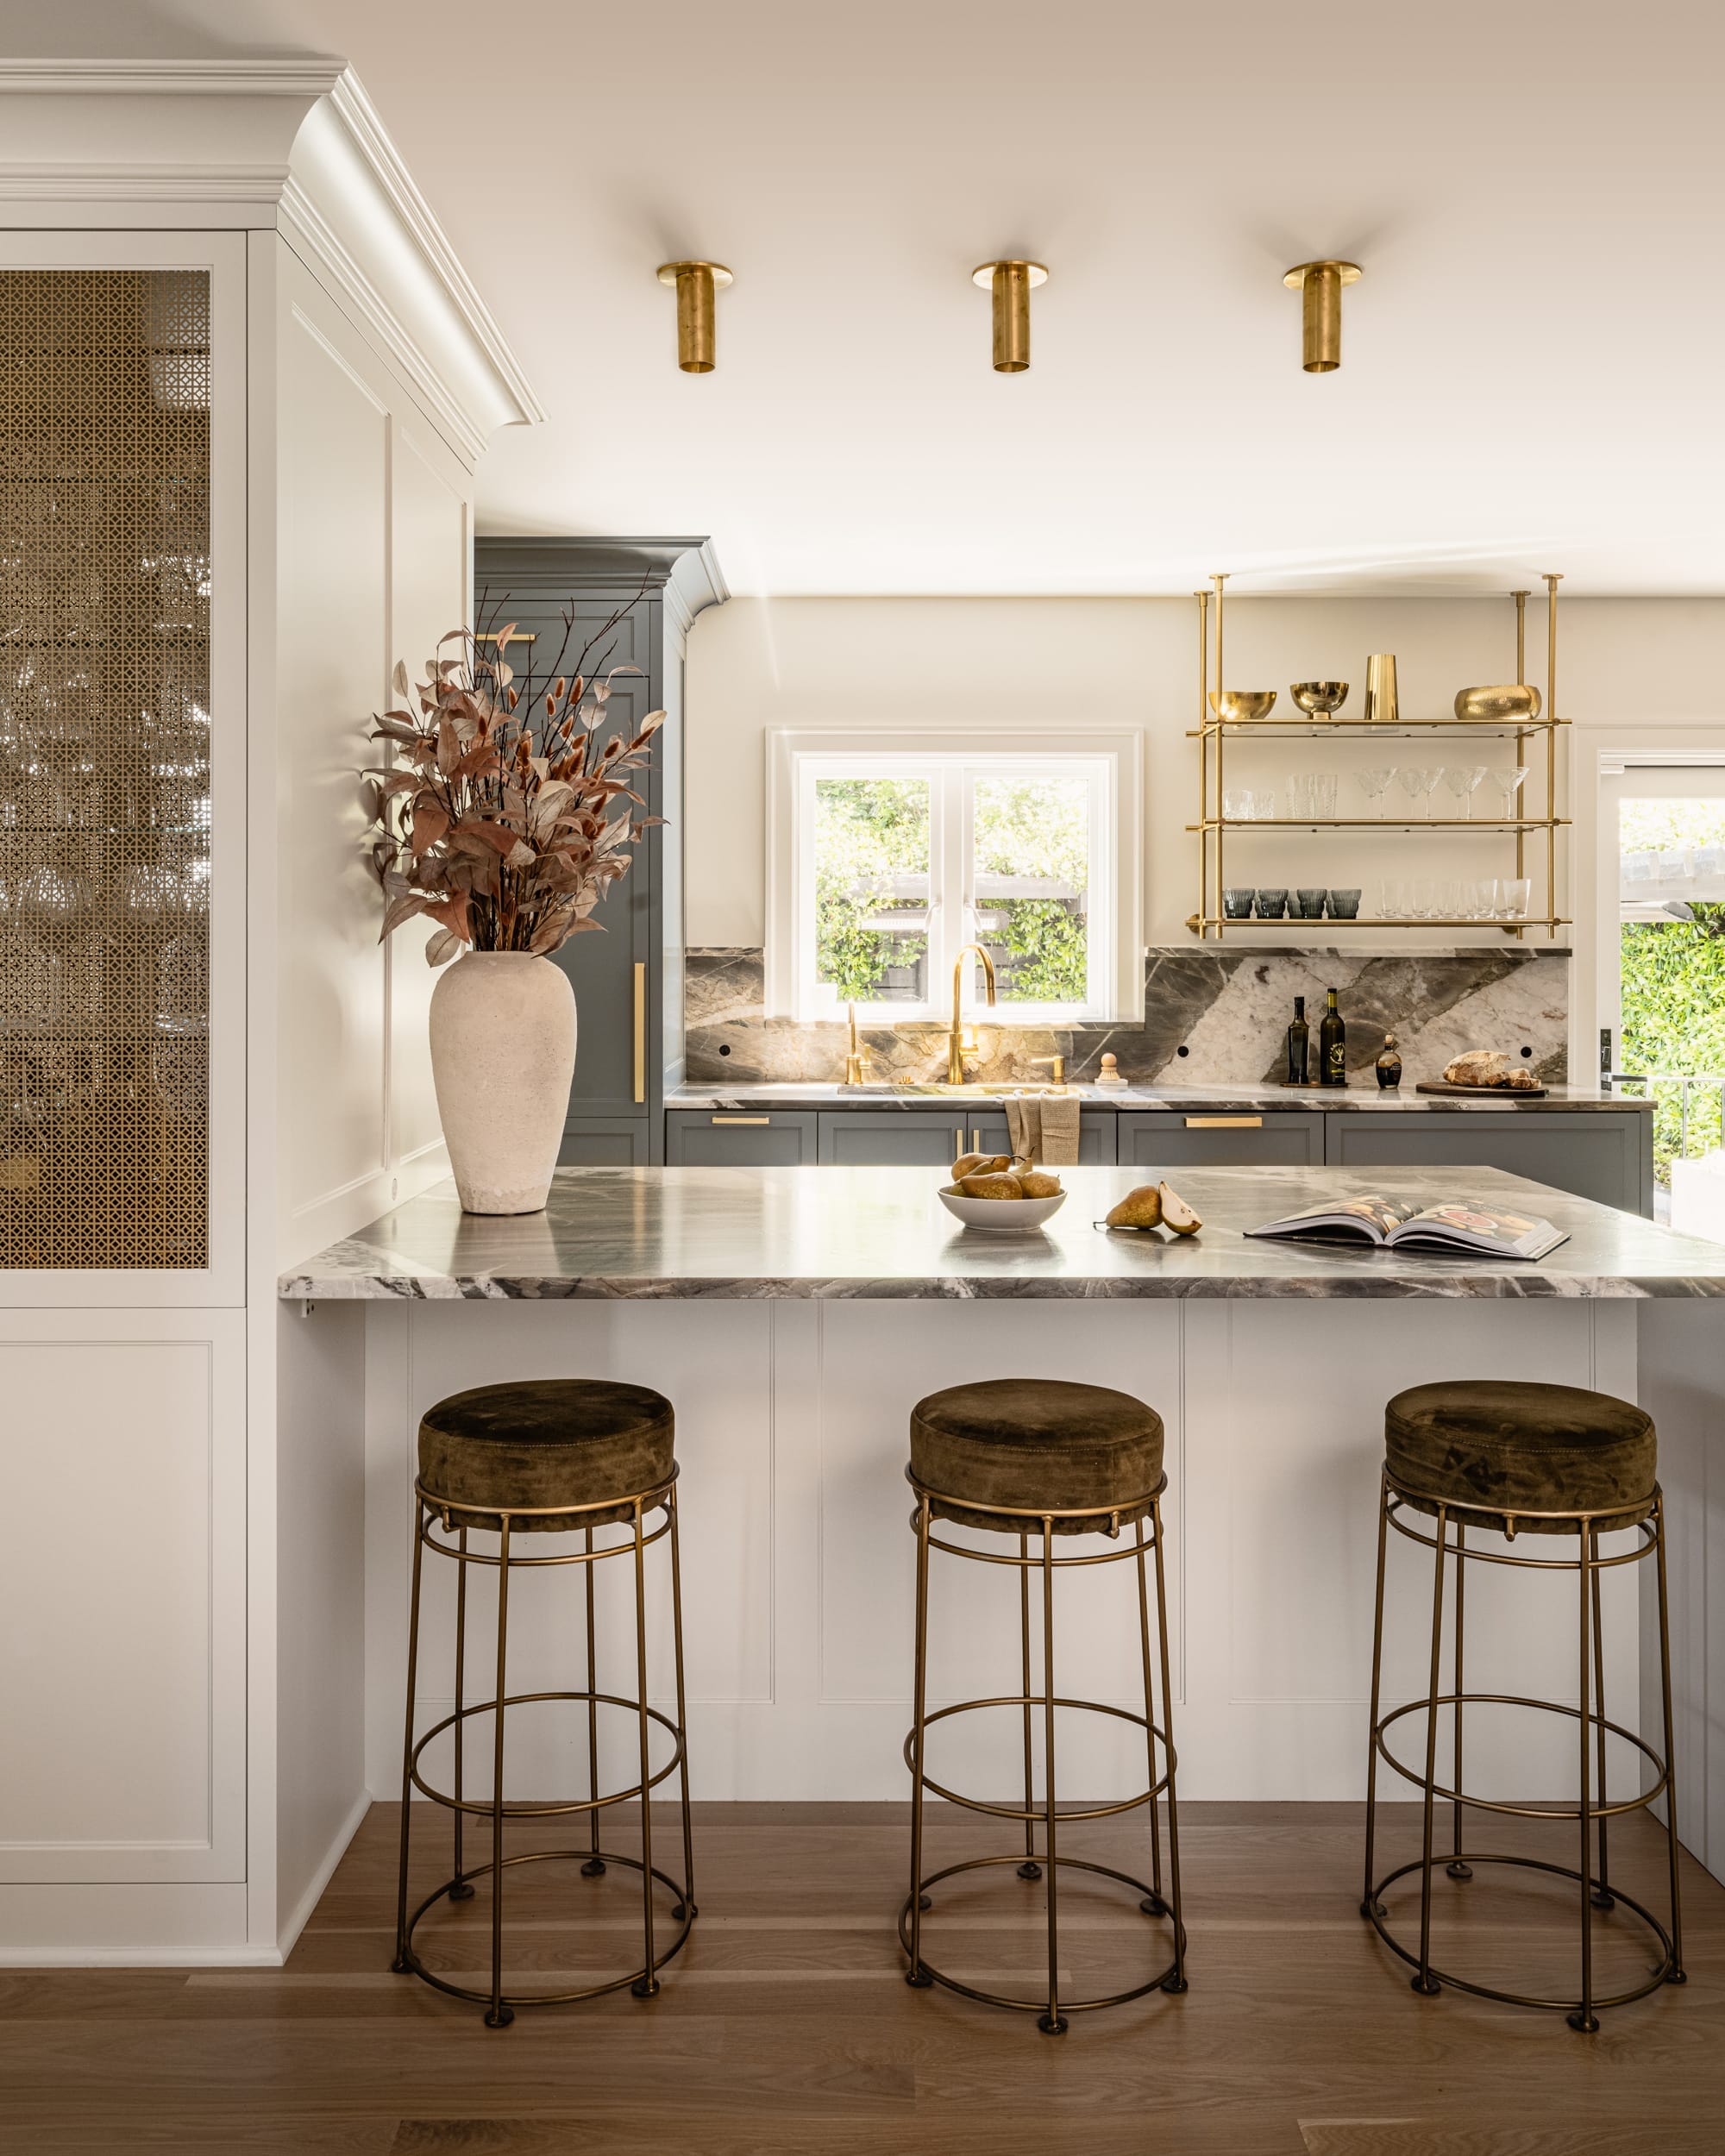 A kitchen with a marble countertop and stools.